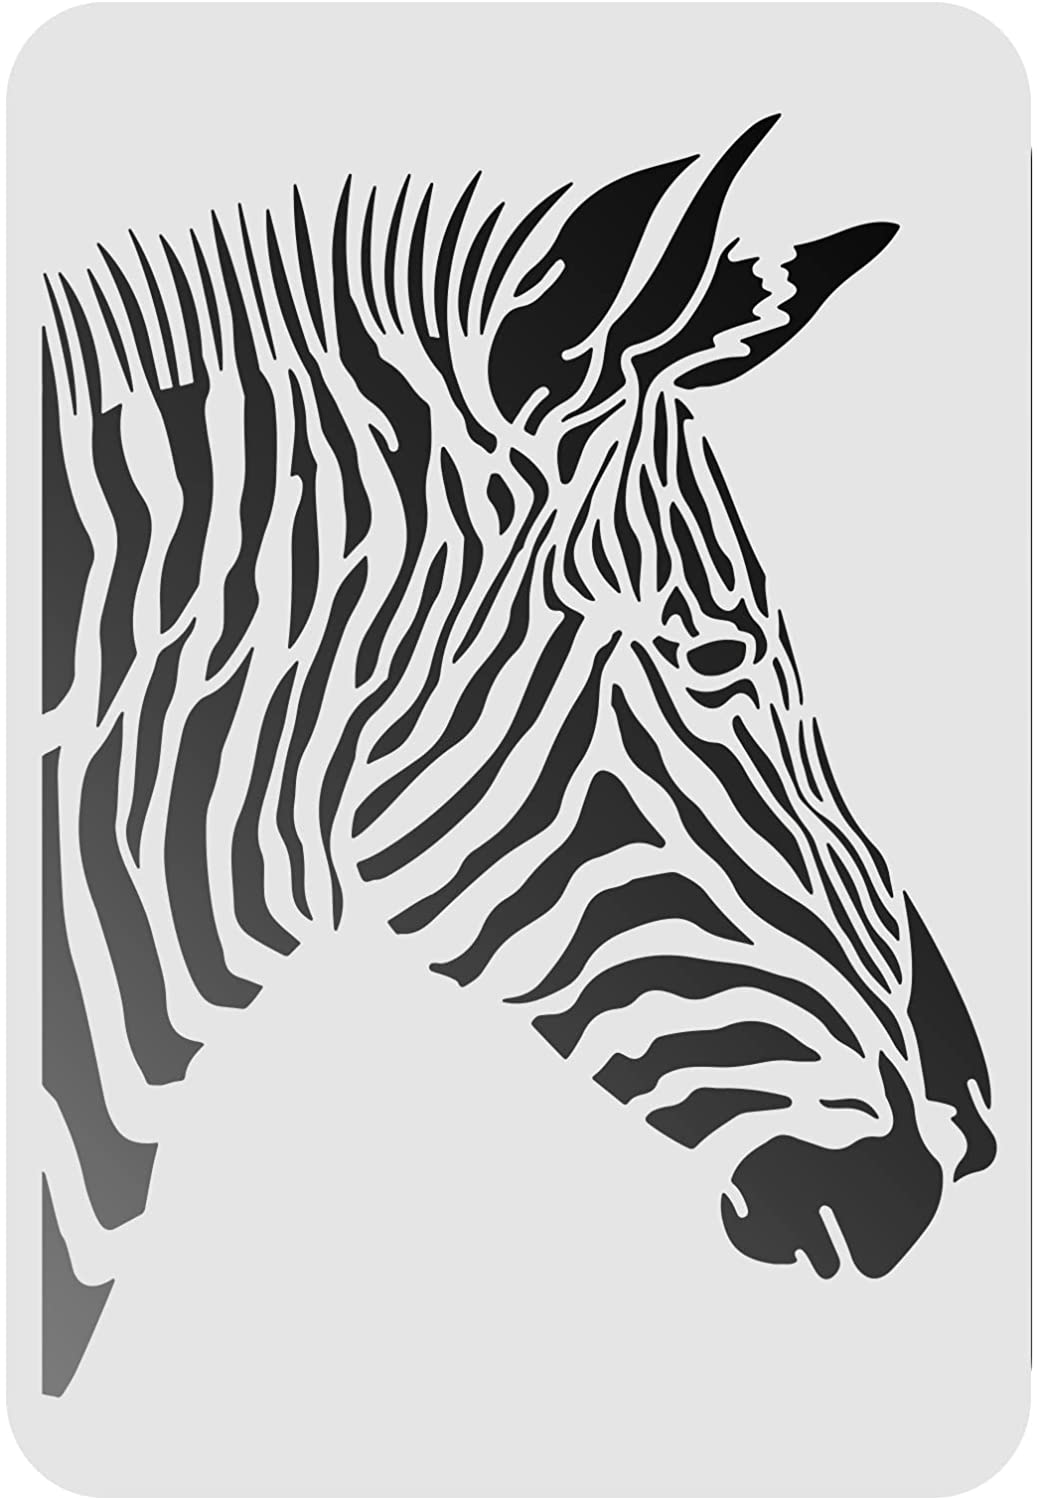 CRASPIRE Zebra Drawing Painting Stencils Template 11.8x11.8inch Plastic  Stencils Decoration Square Reusable Stencils for Painting on Wood, Floor,  Wall and Tile